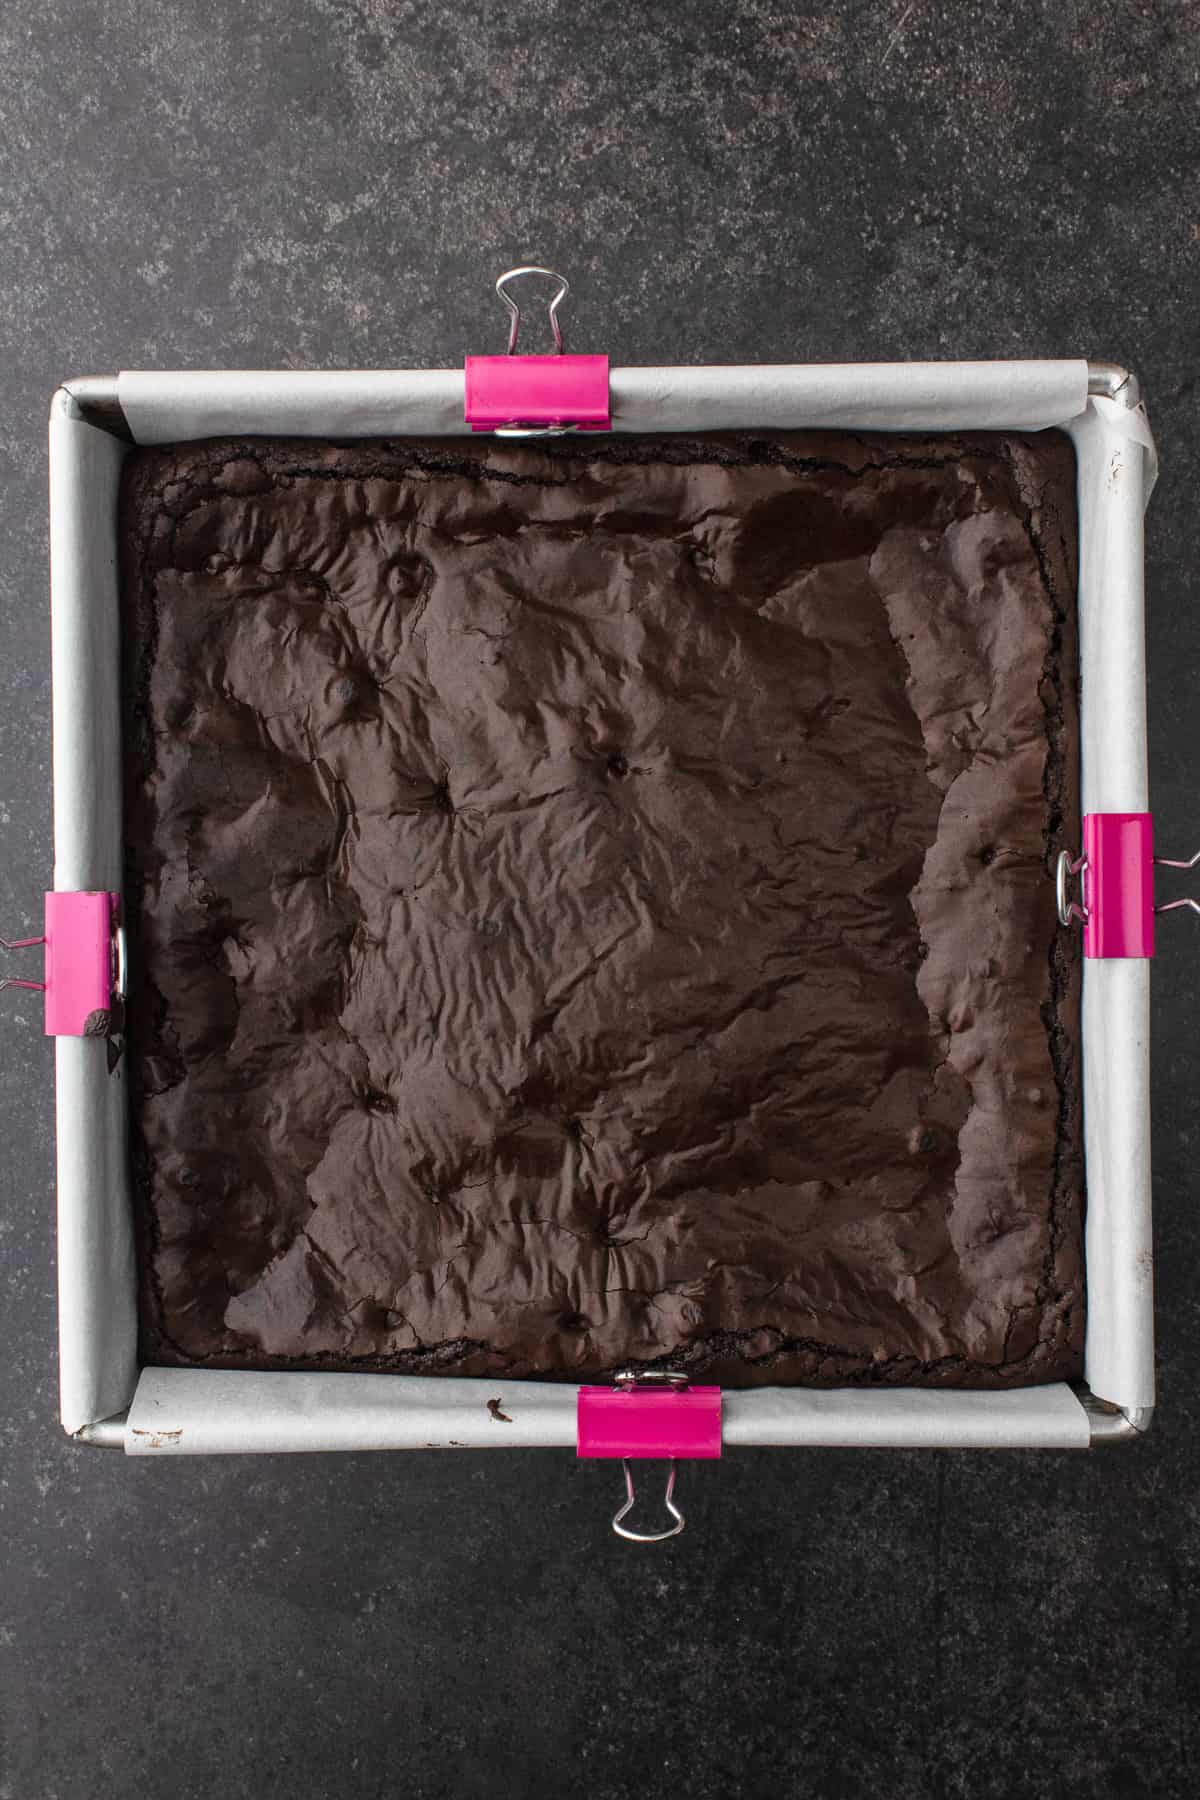 Cooked brownies out of the oven